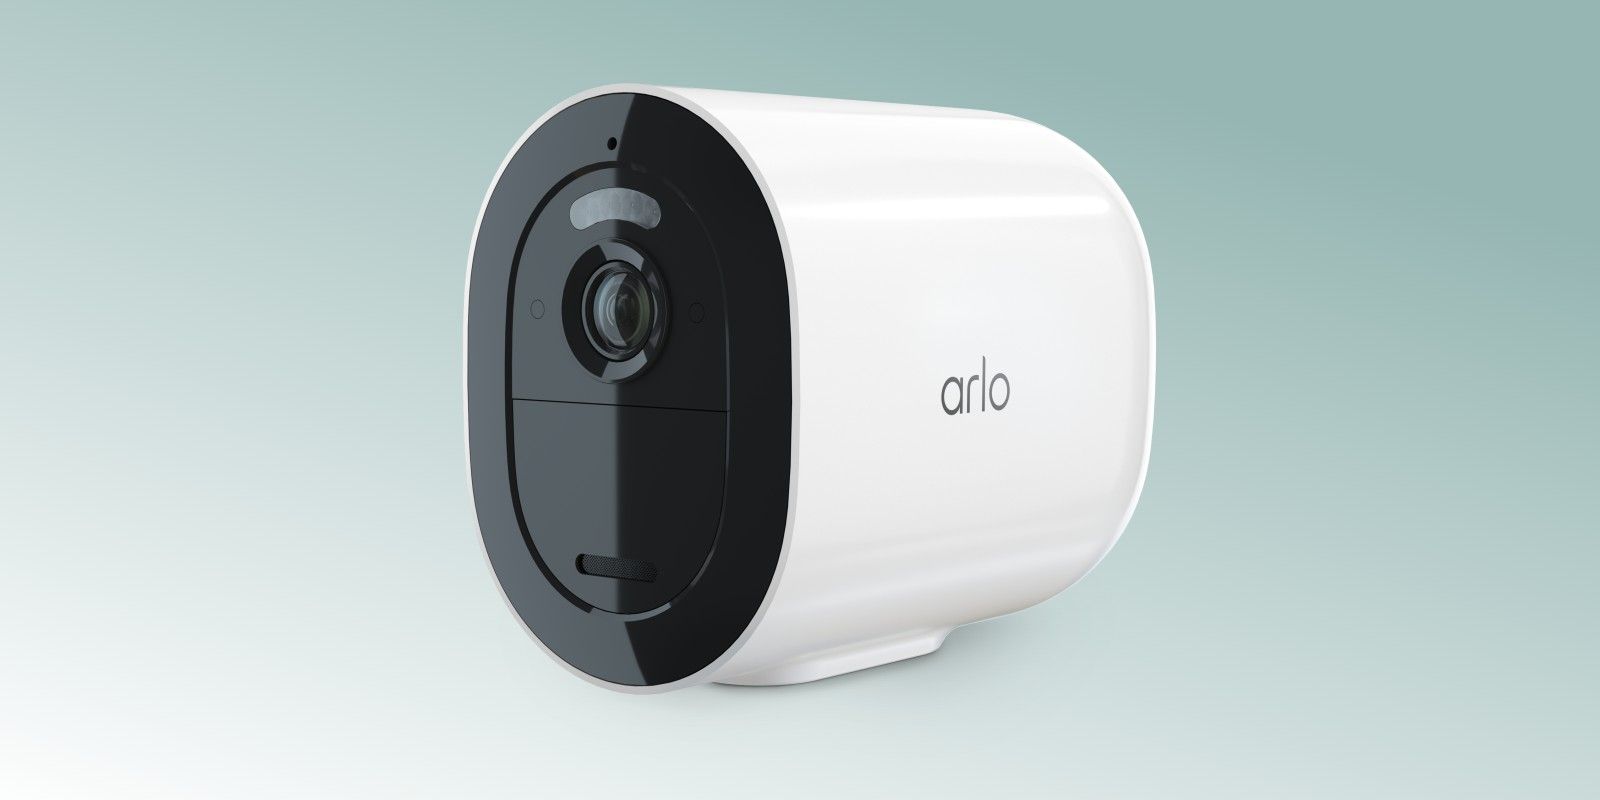 A photo of an Arlo Camera against a green gradient background